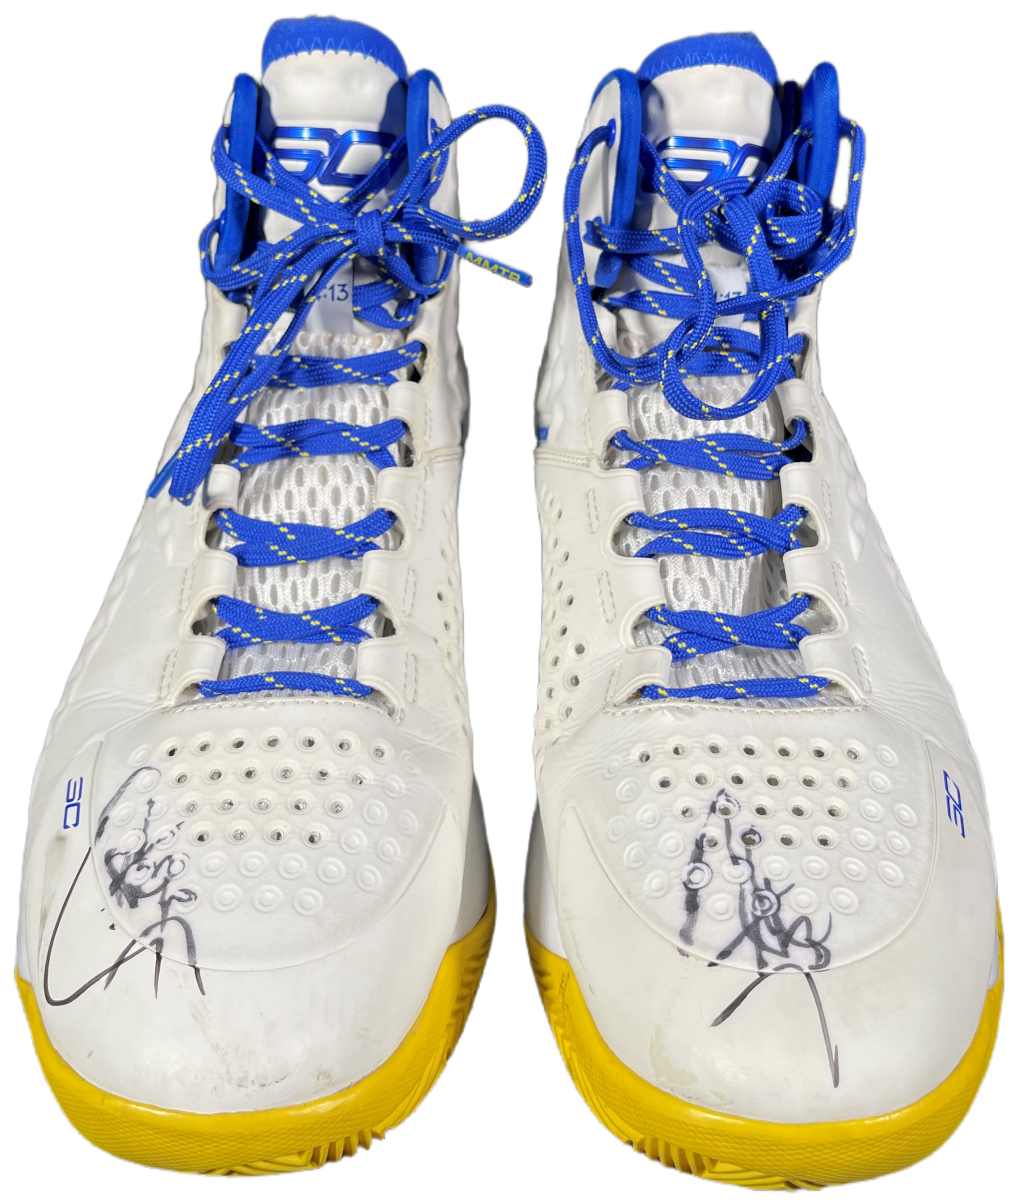 2014-15 Stephen Curry game-worn, signed and photo-matched sneakers.